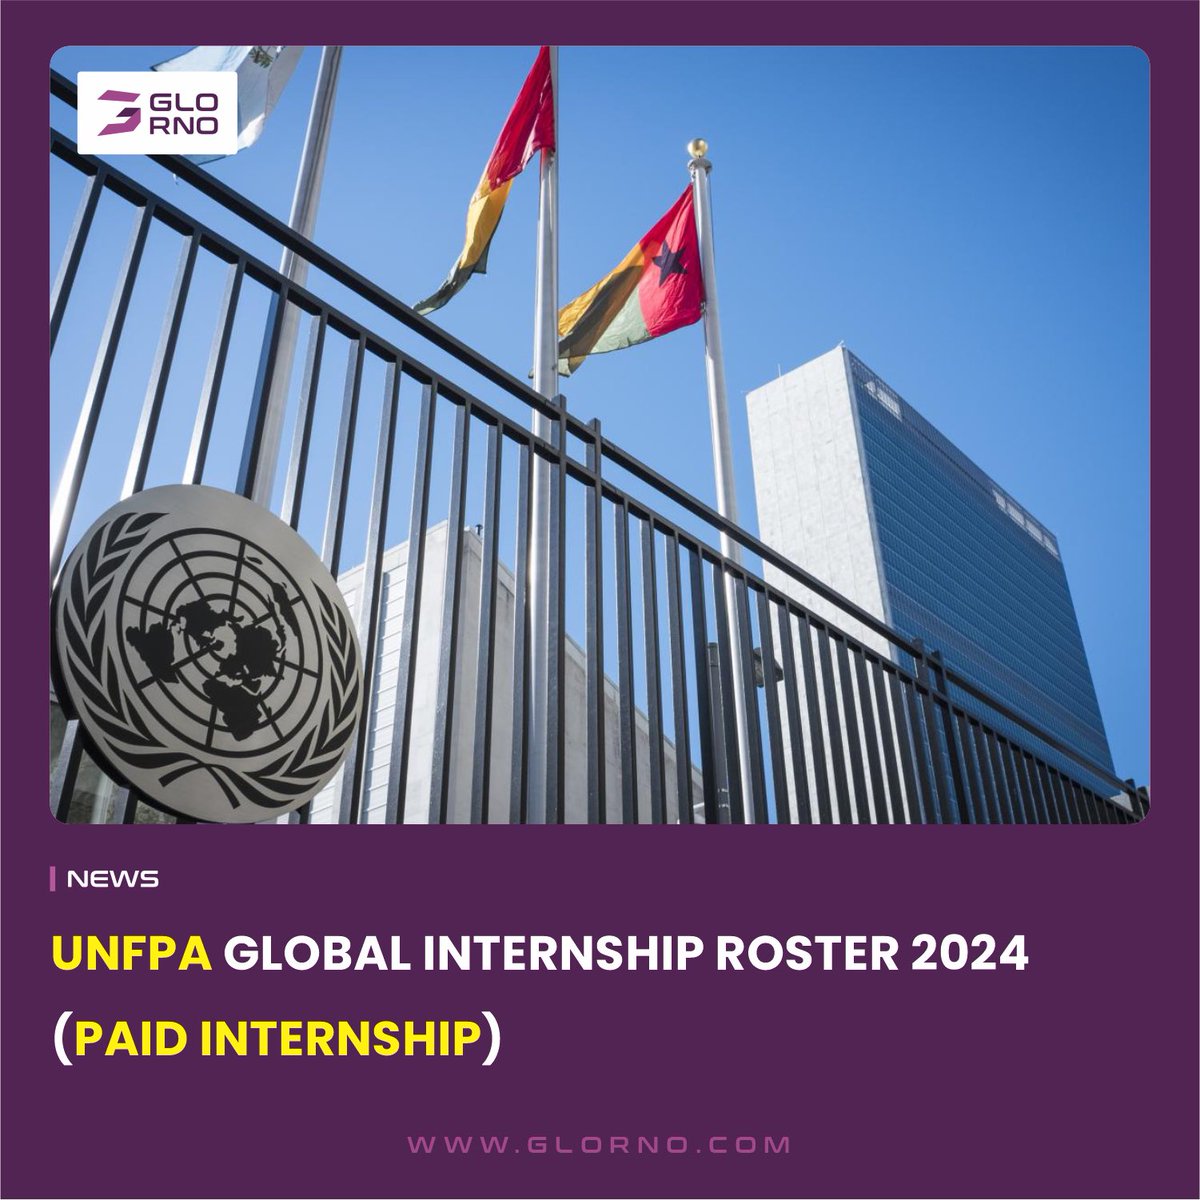 🌍 Explore global opportunities! The UNFPA Global Internship Roster for 2024 offers paid internships. Dive into impactful work in international development. Apply now and be part of positive change! glorno.com/index.php/2024…

 #UNFPAInternship #GlobalOpportunities #PaidInternship